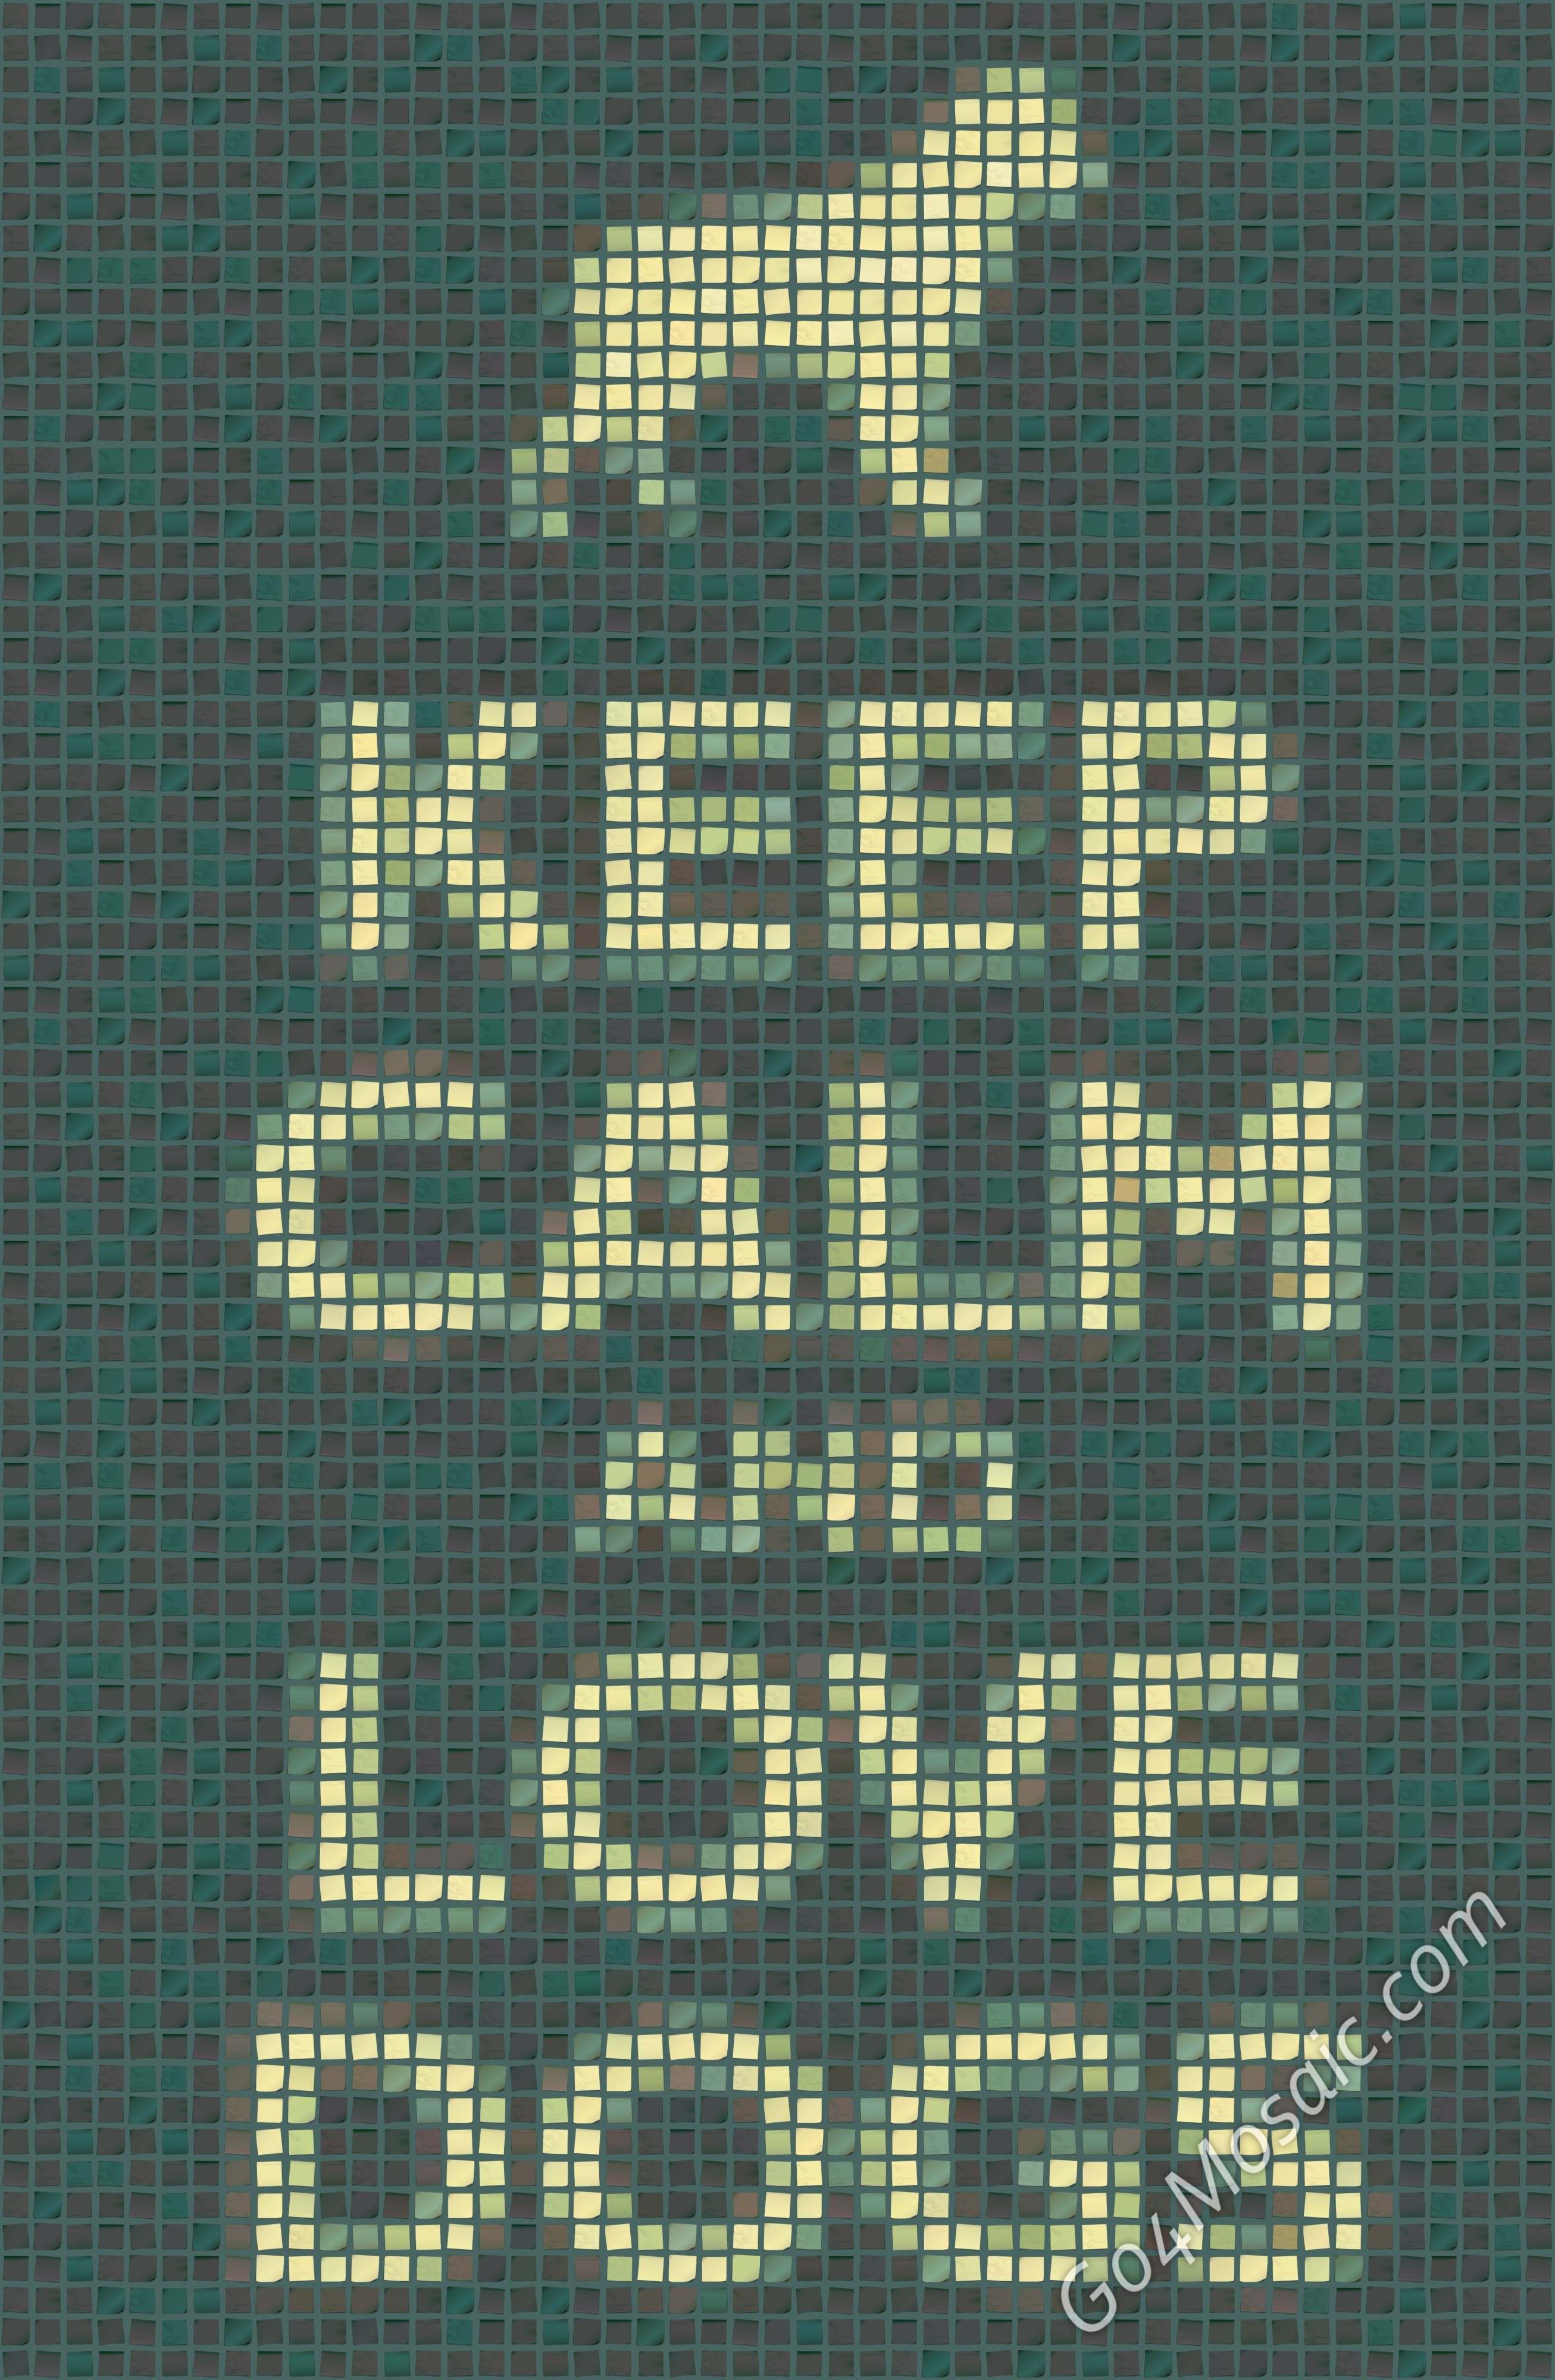 Keep Calm and Love Dogs Poster from Postits